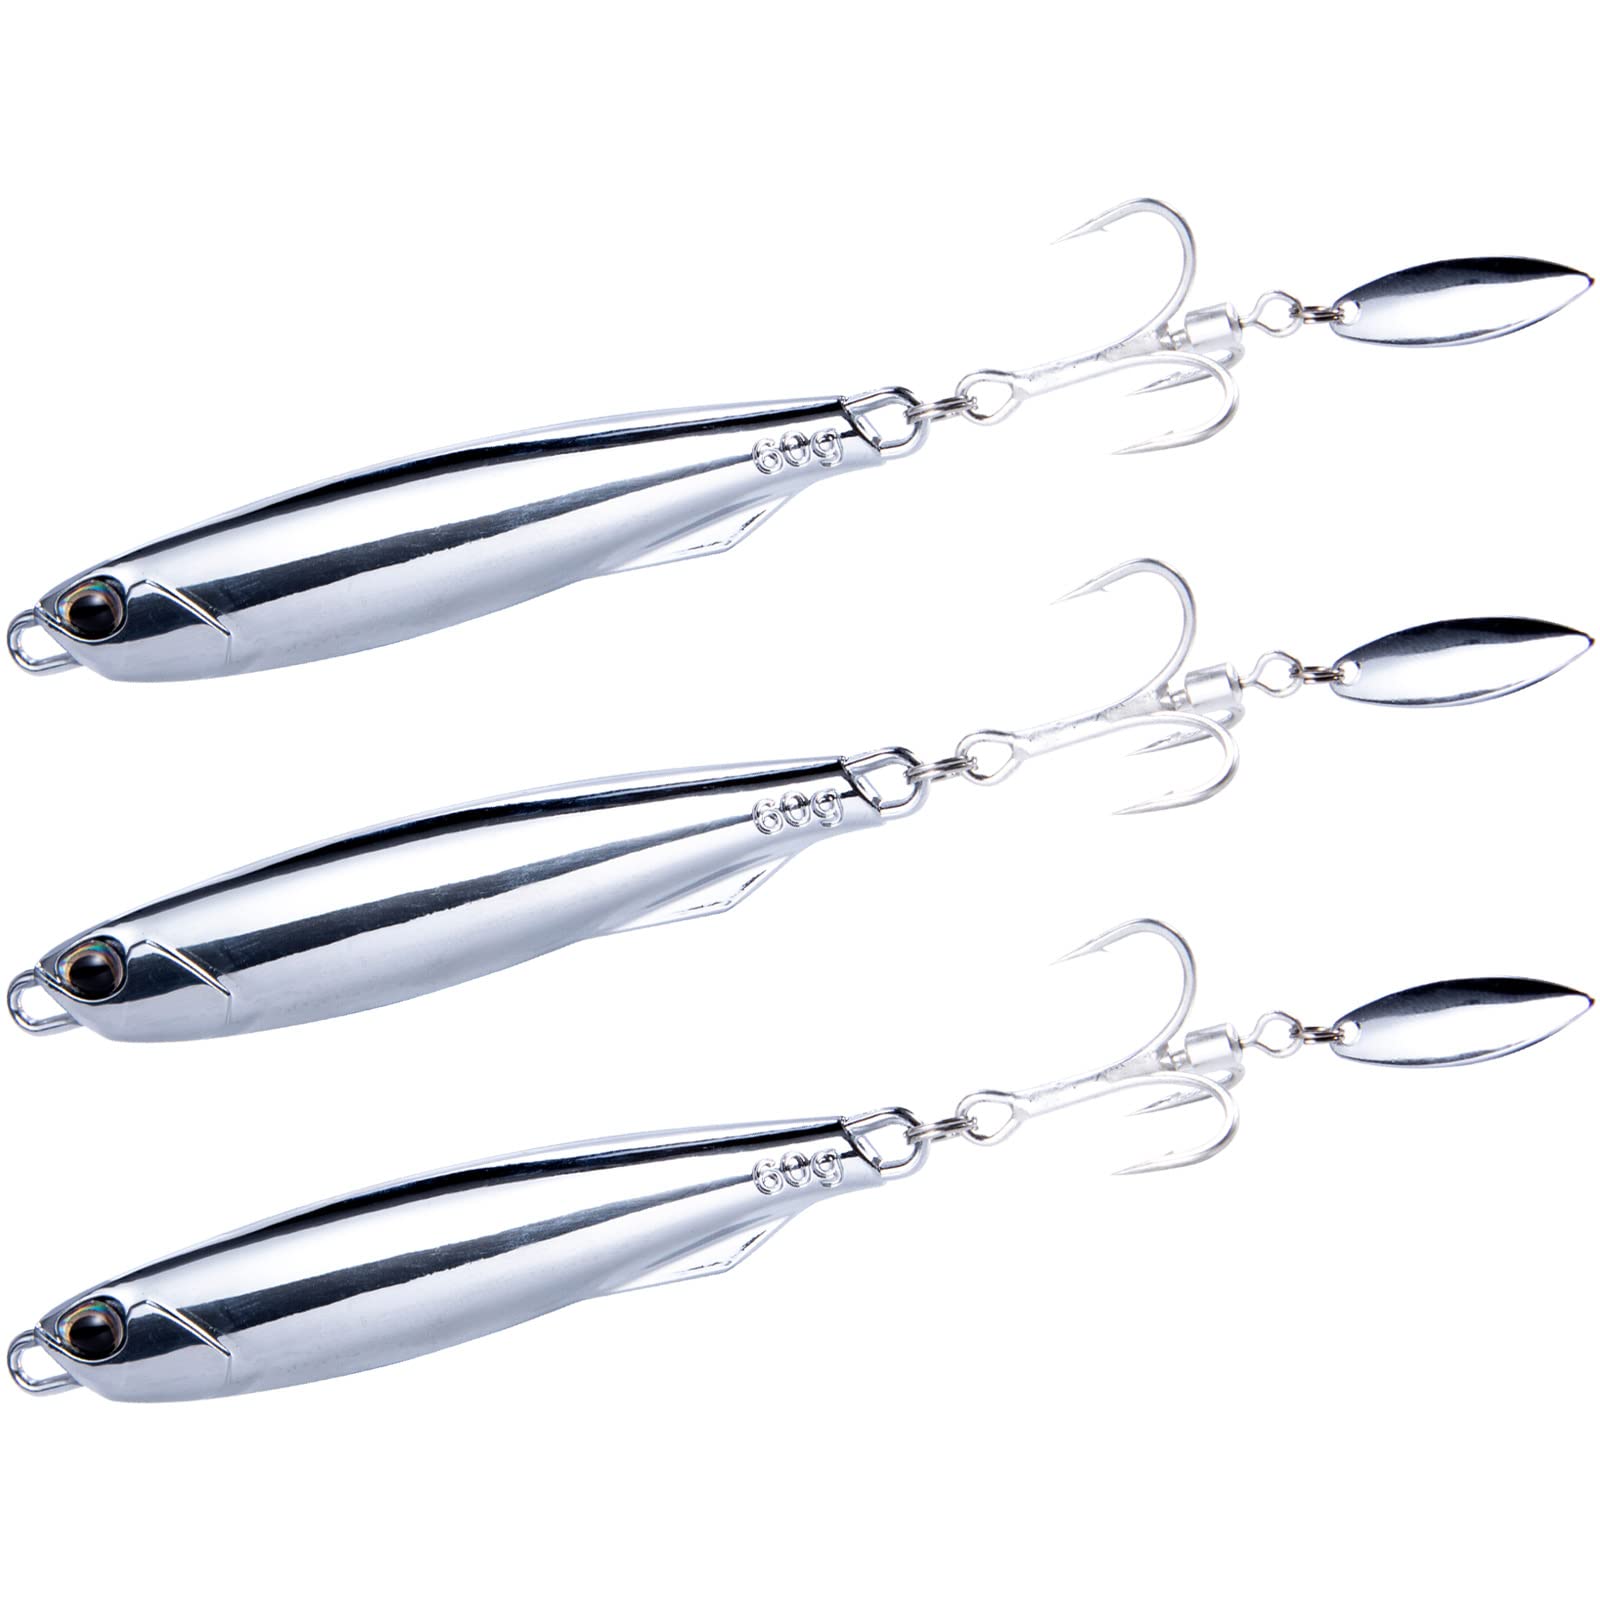 15 Silver Hex Fishing Spoon Blank 3 Sizes 5 Of Each Casting Trolling Tackle